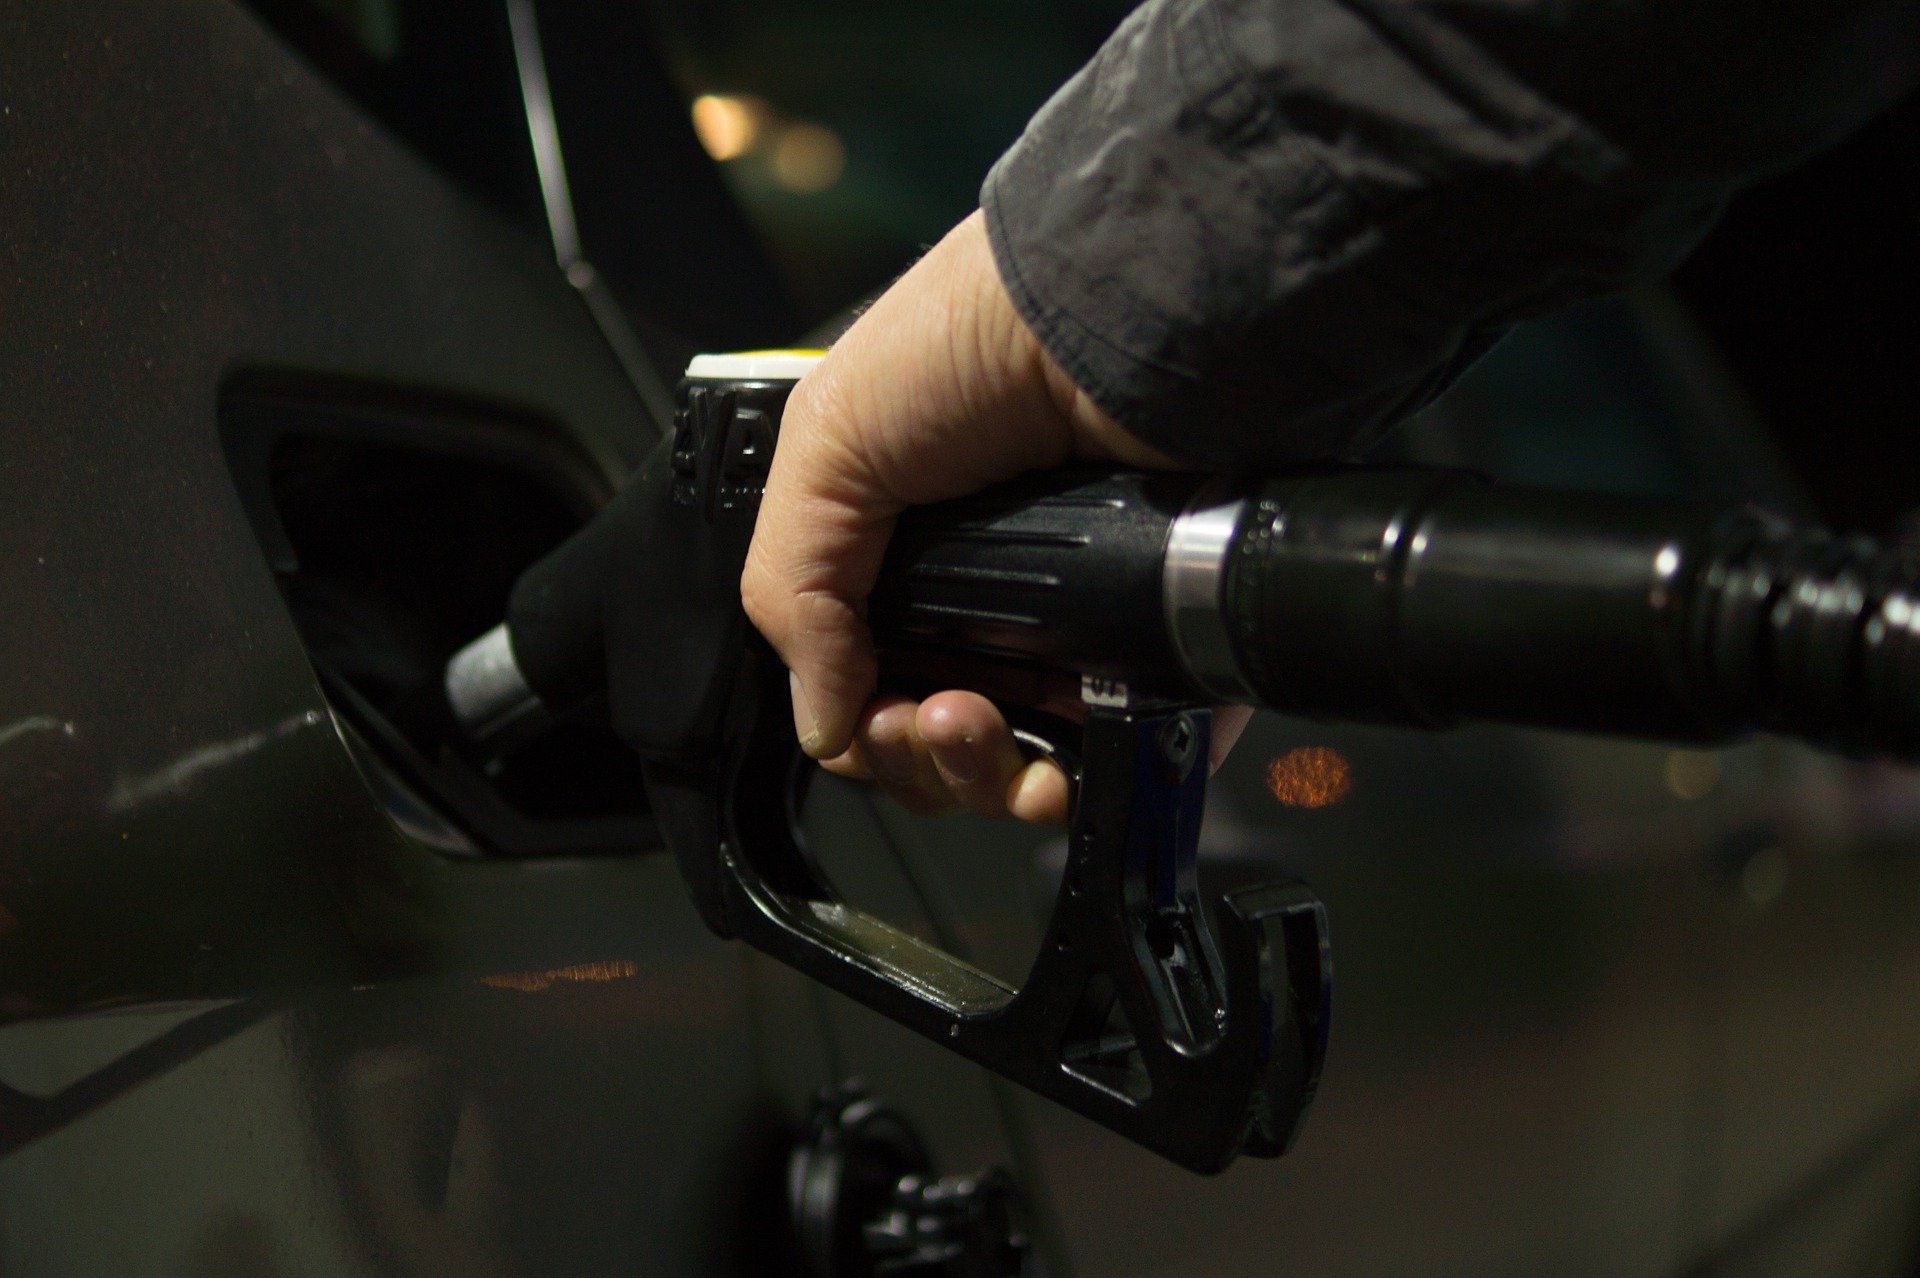 Fuel prices: Petrol priced at Rs 95.41, diesel Rs 86.67 in Delhi on February 3, 2022